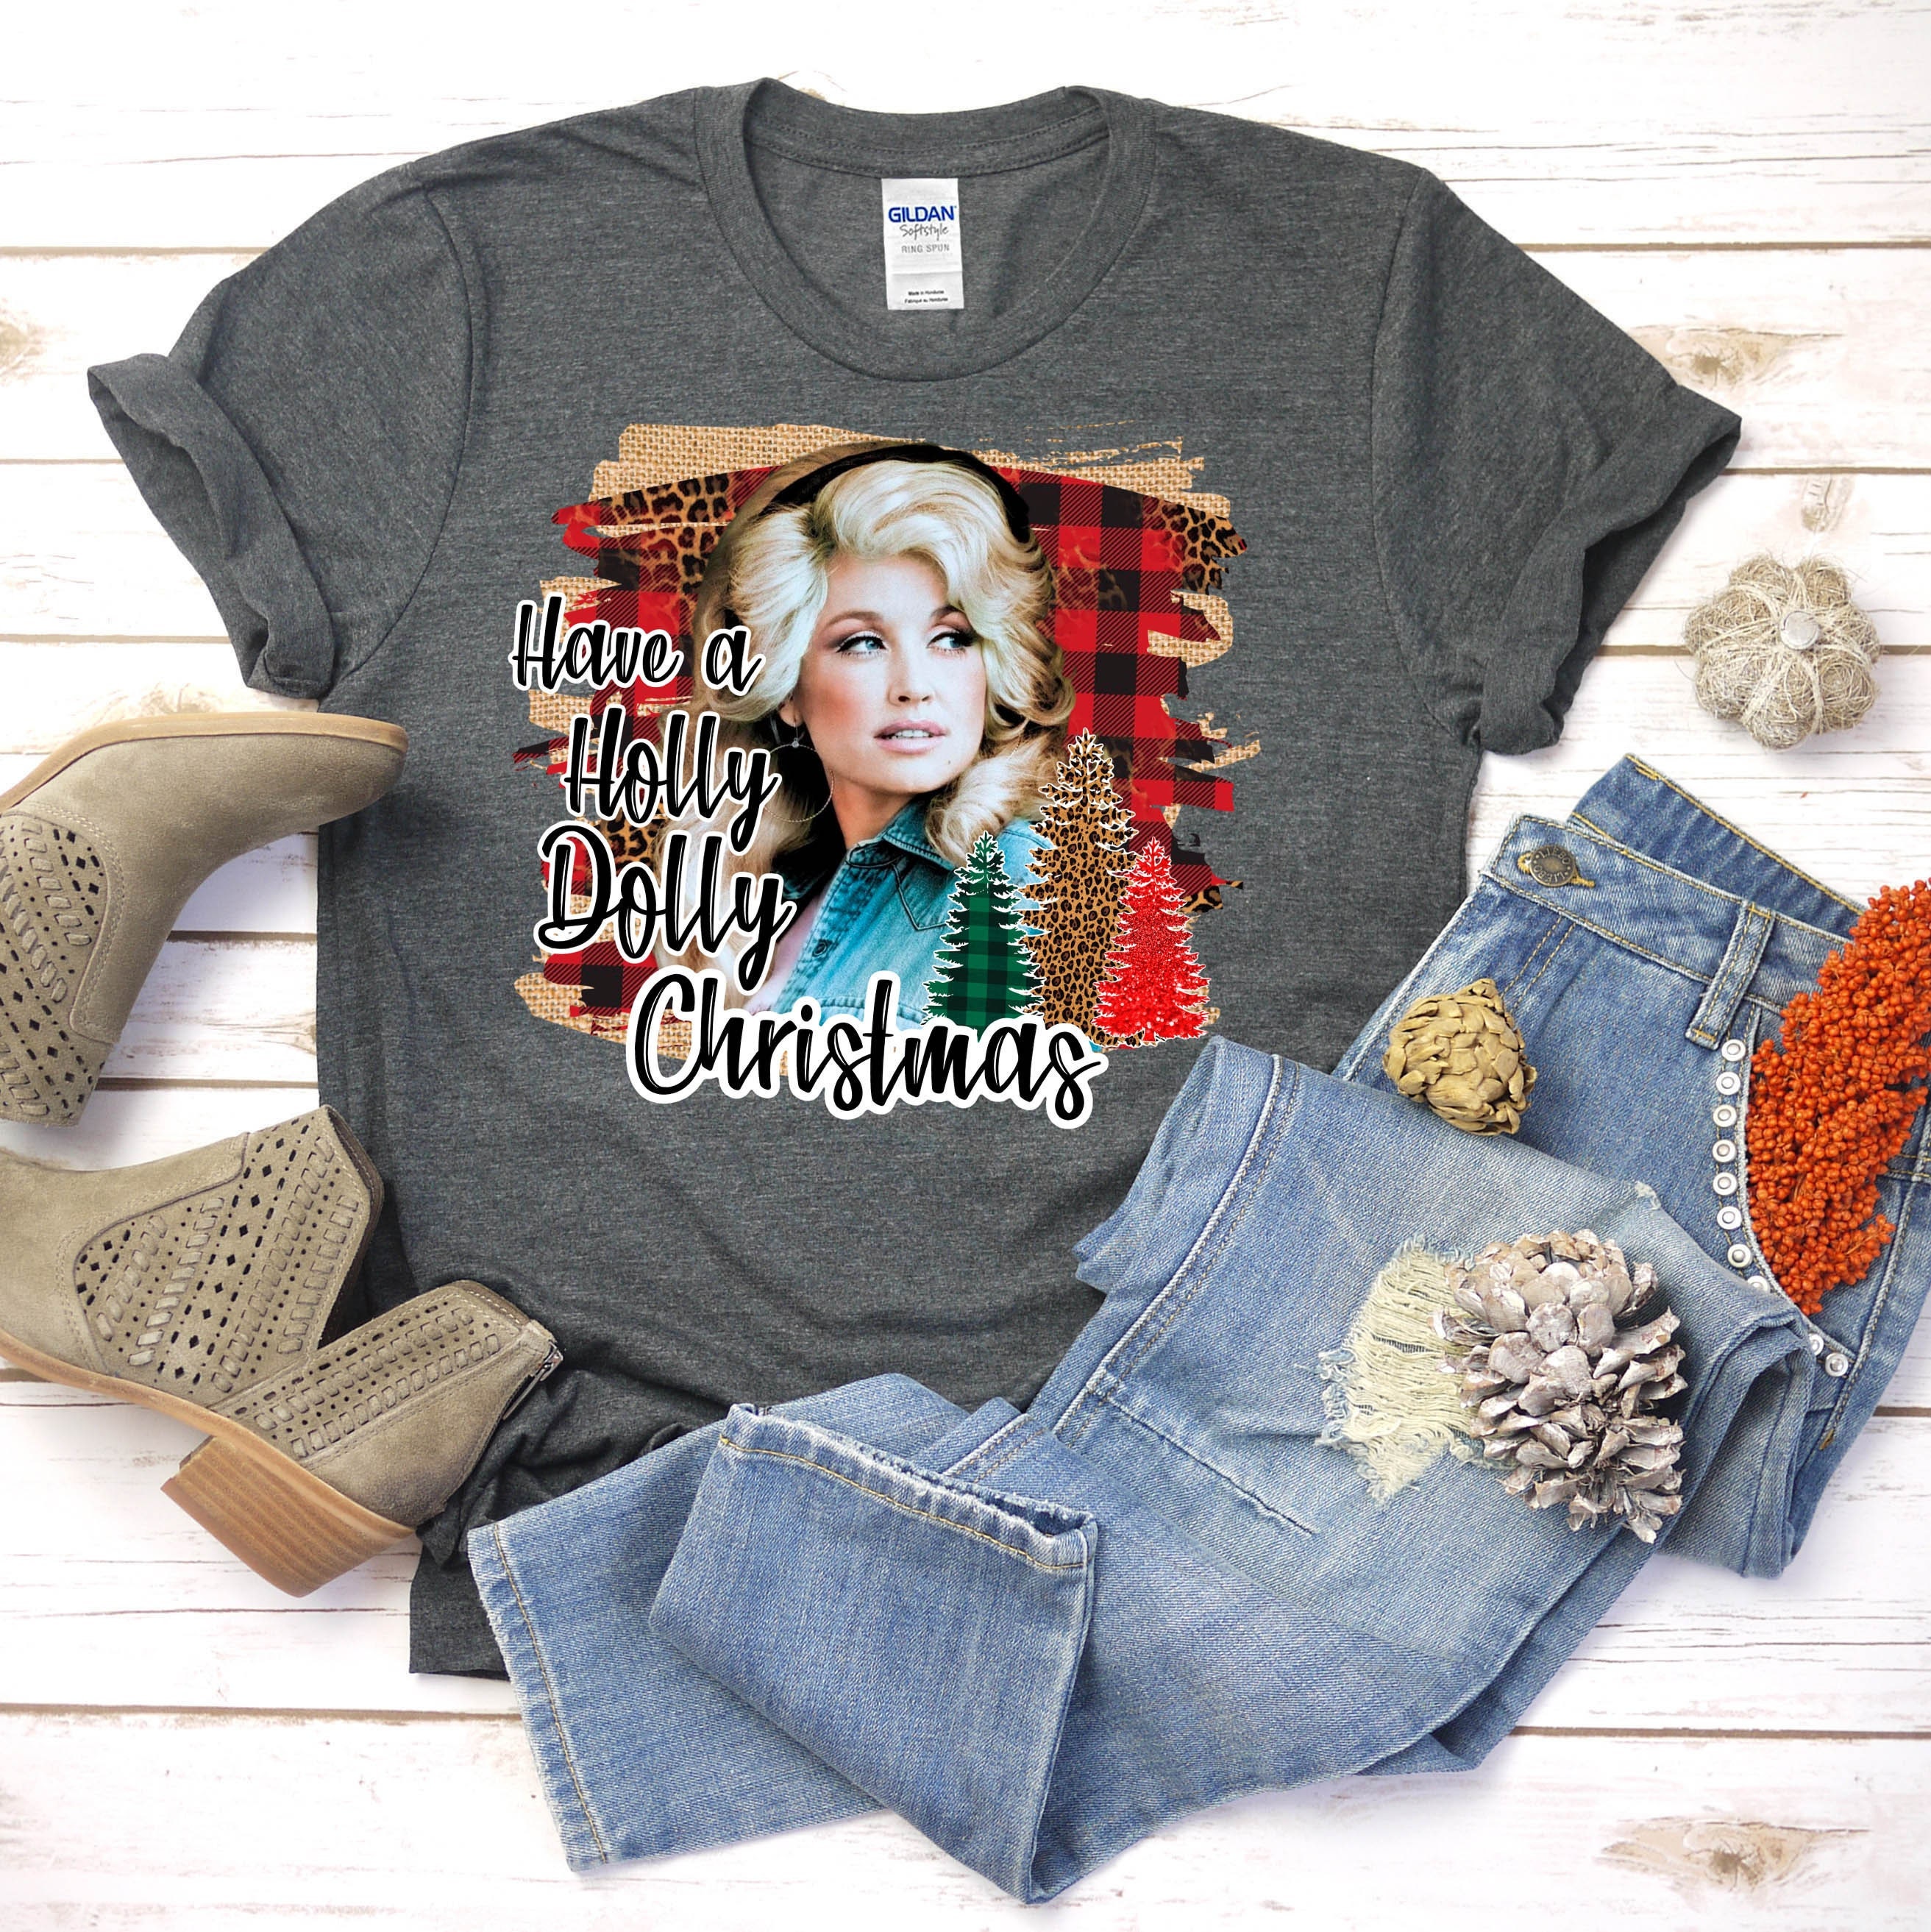 Discover Holly Dolly Christmas Shirt, Christmas Movie Watching Shirt, Christmas Gift Idea